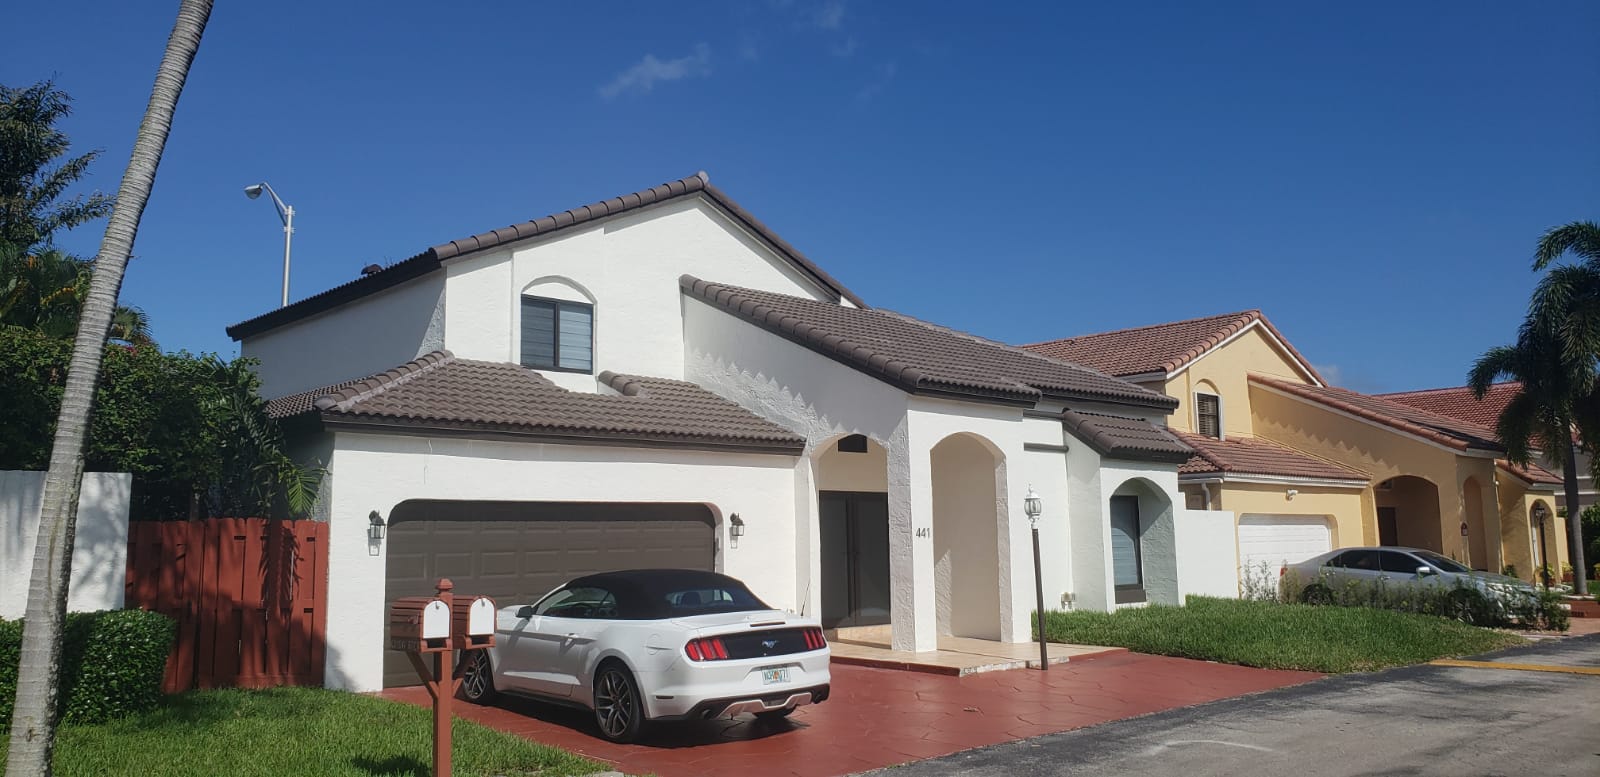 Exterior Doral-North Miami Home Makeover After